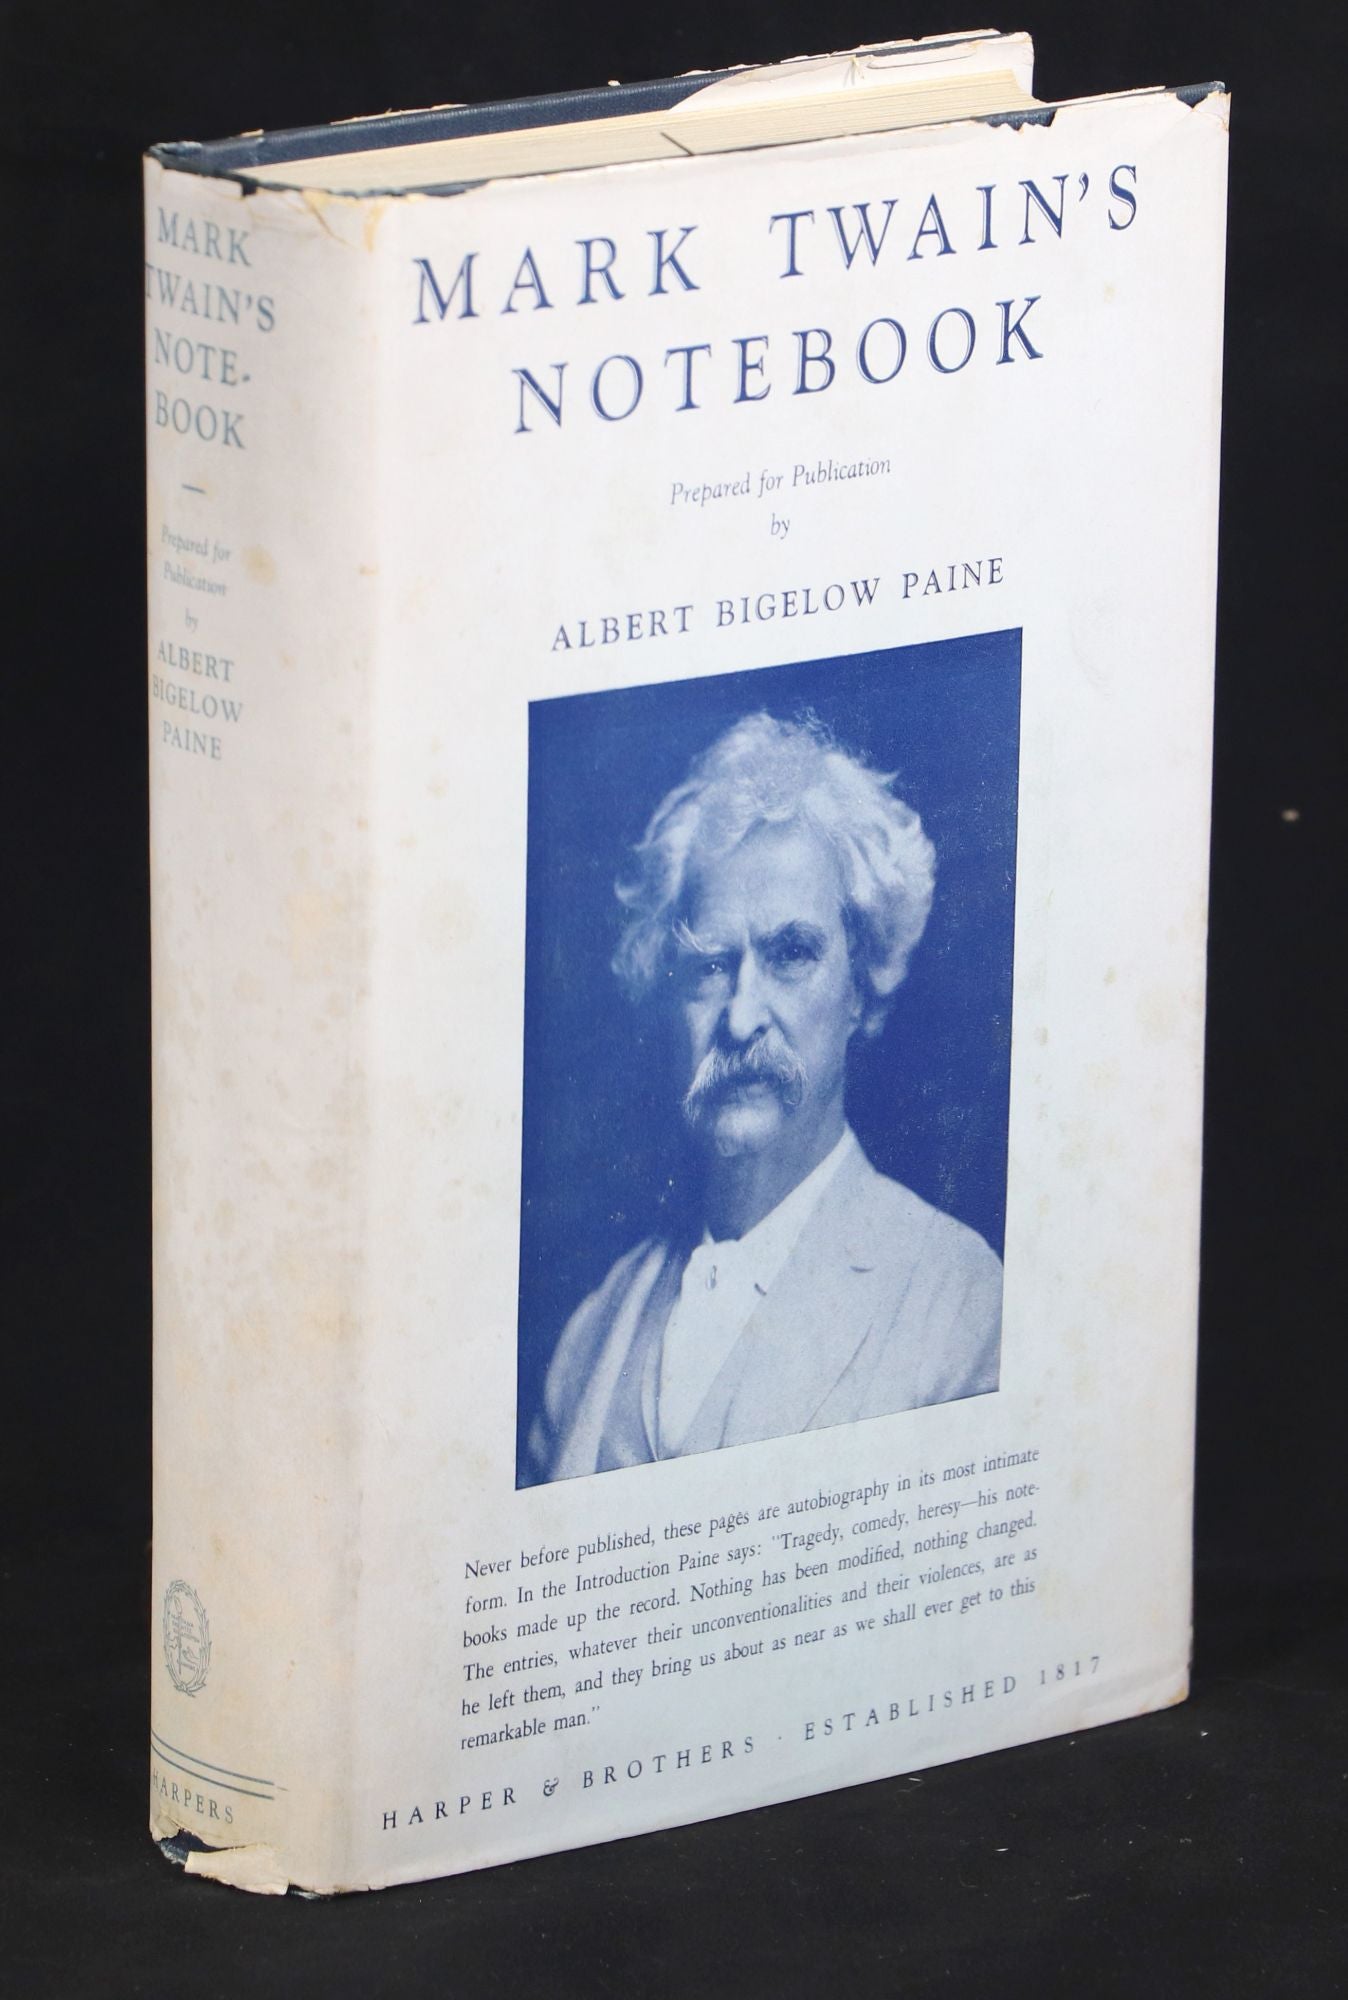 THE COMPLETE TRAVEL BOOKS OF MARK TWAIN-THE EARLY WORKS: THE